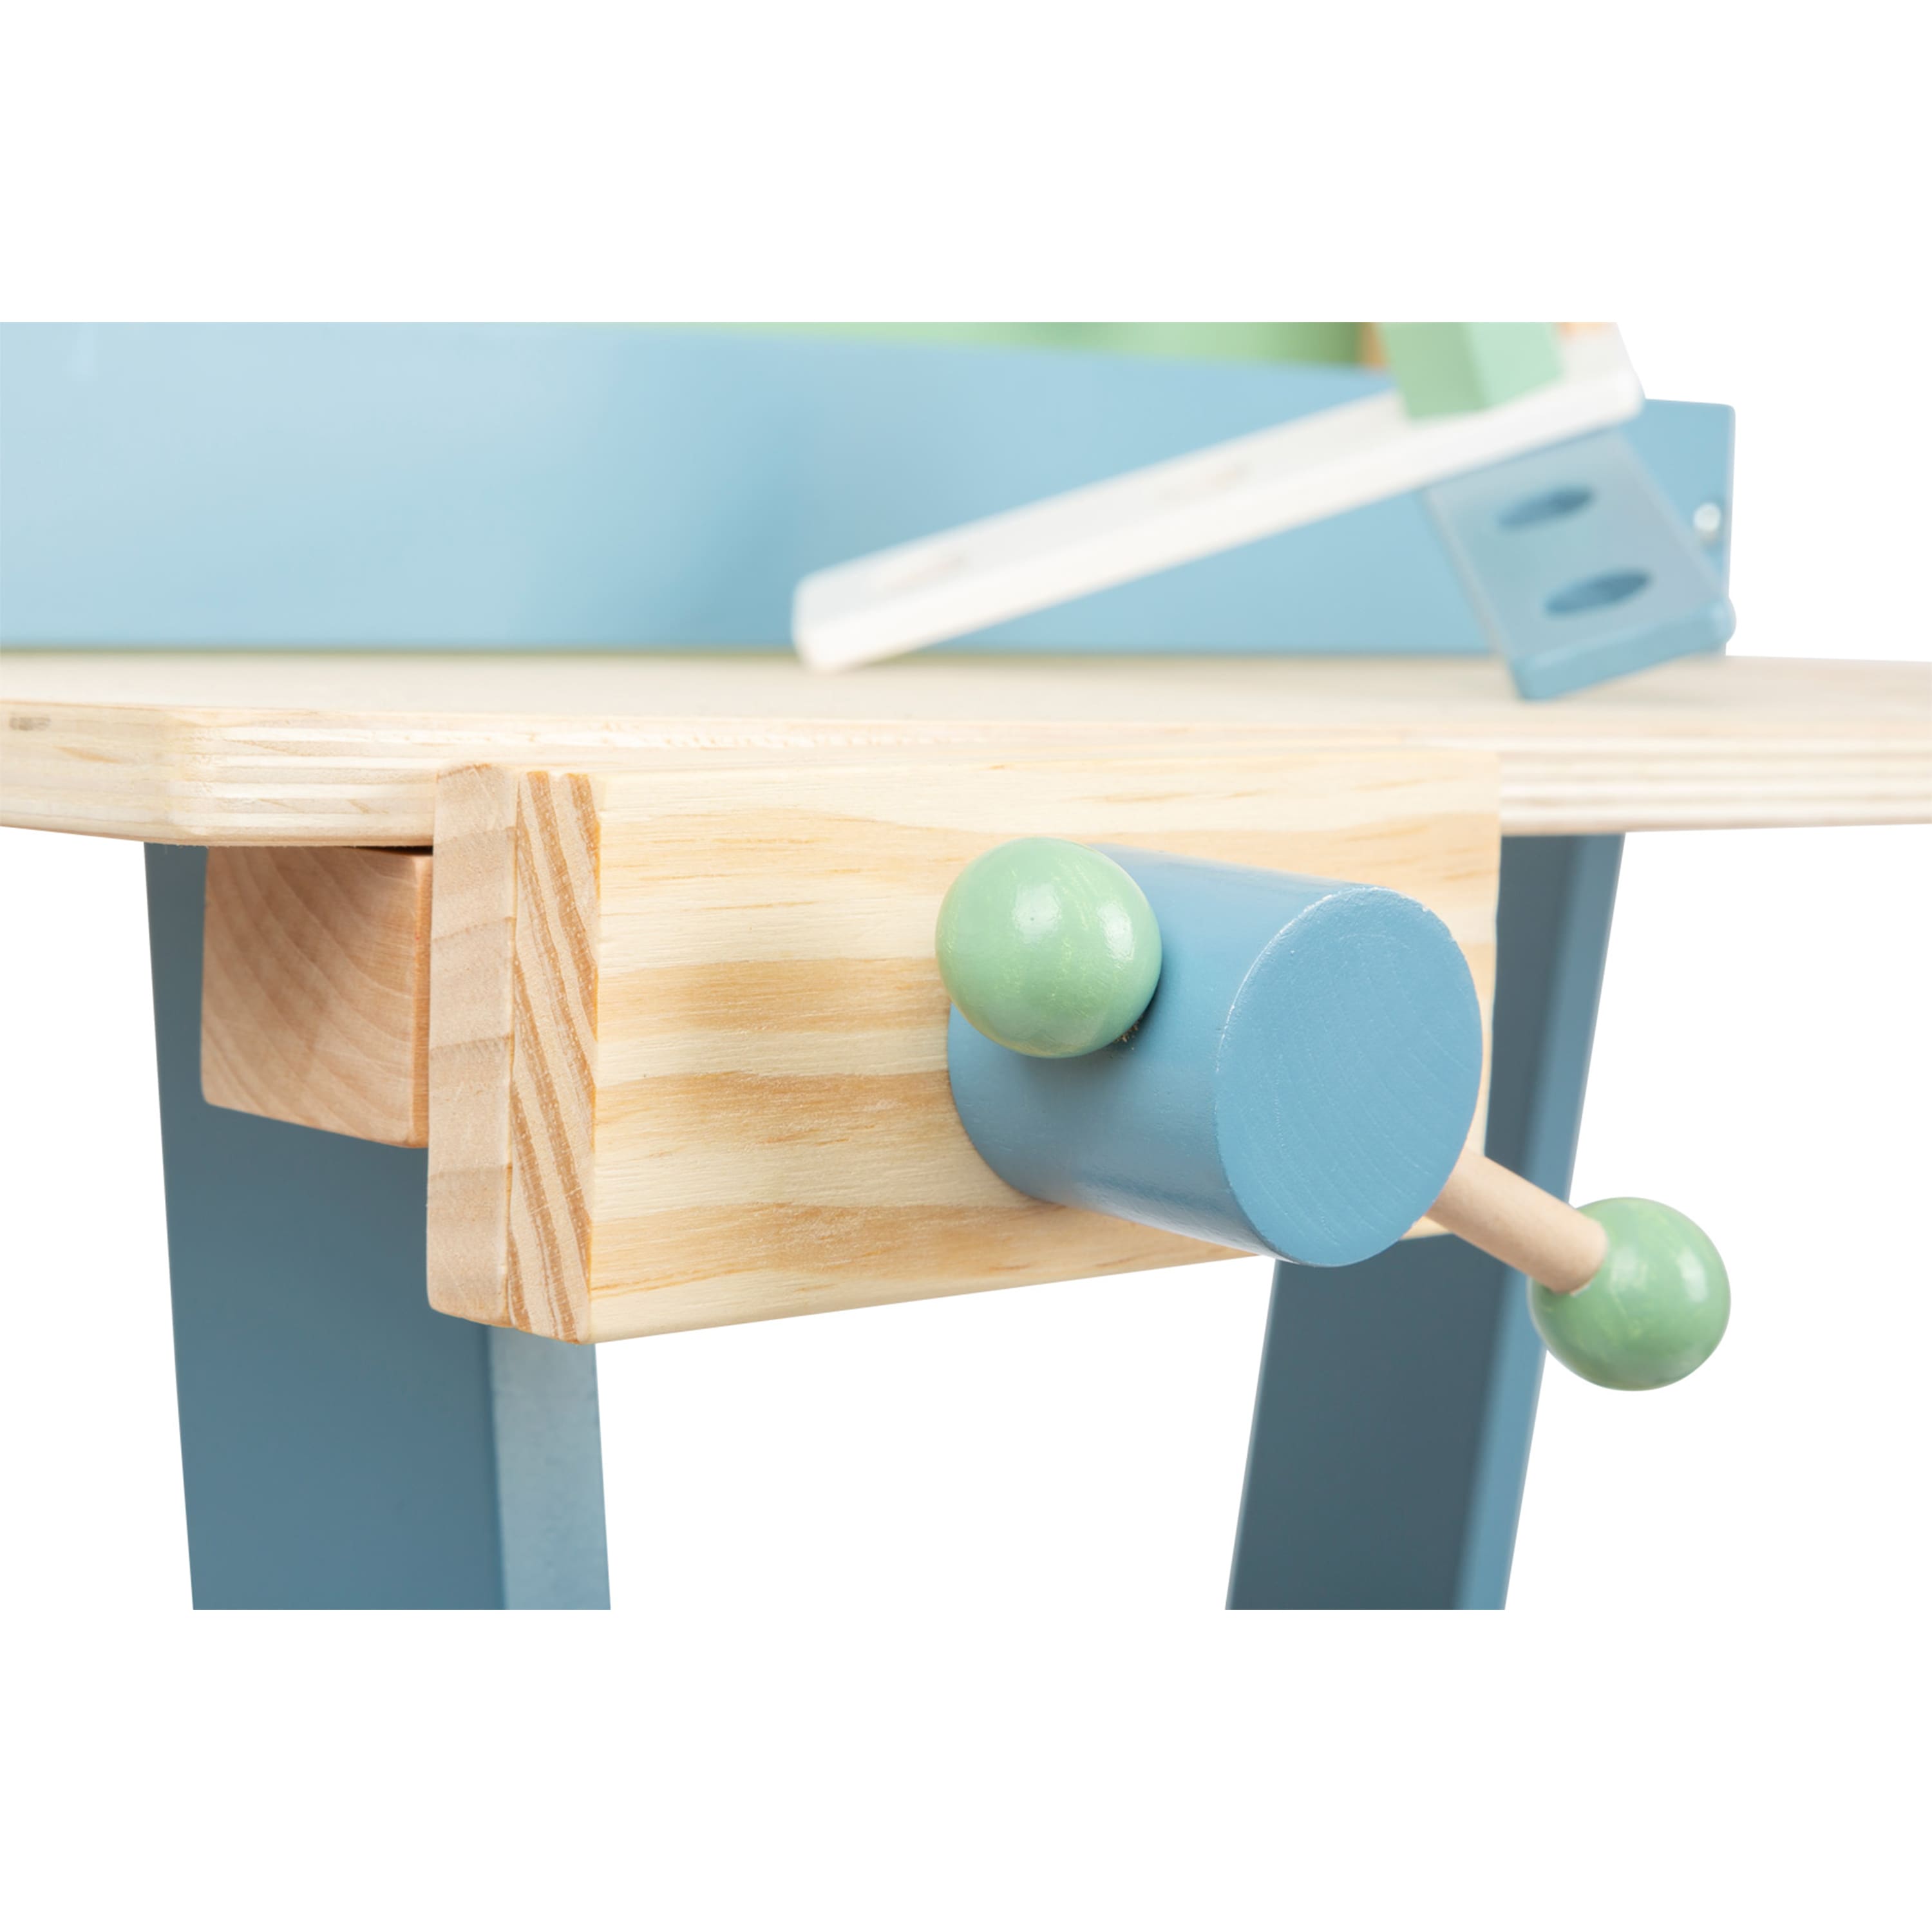 Small Foot Wooden Toys Premium Nordic Workbench : Target